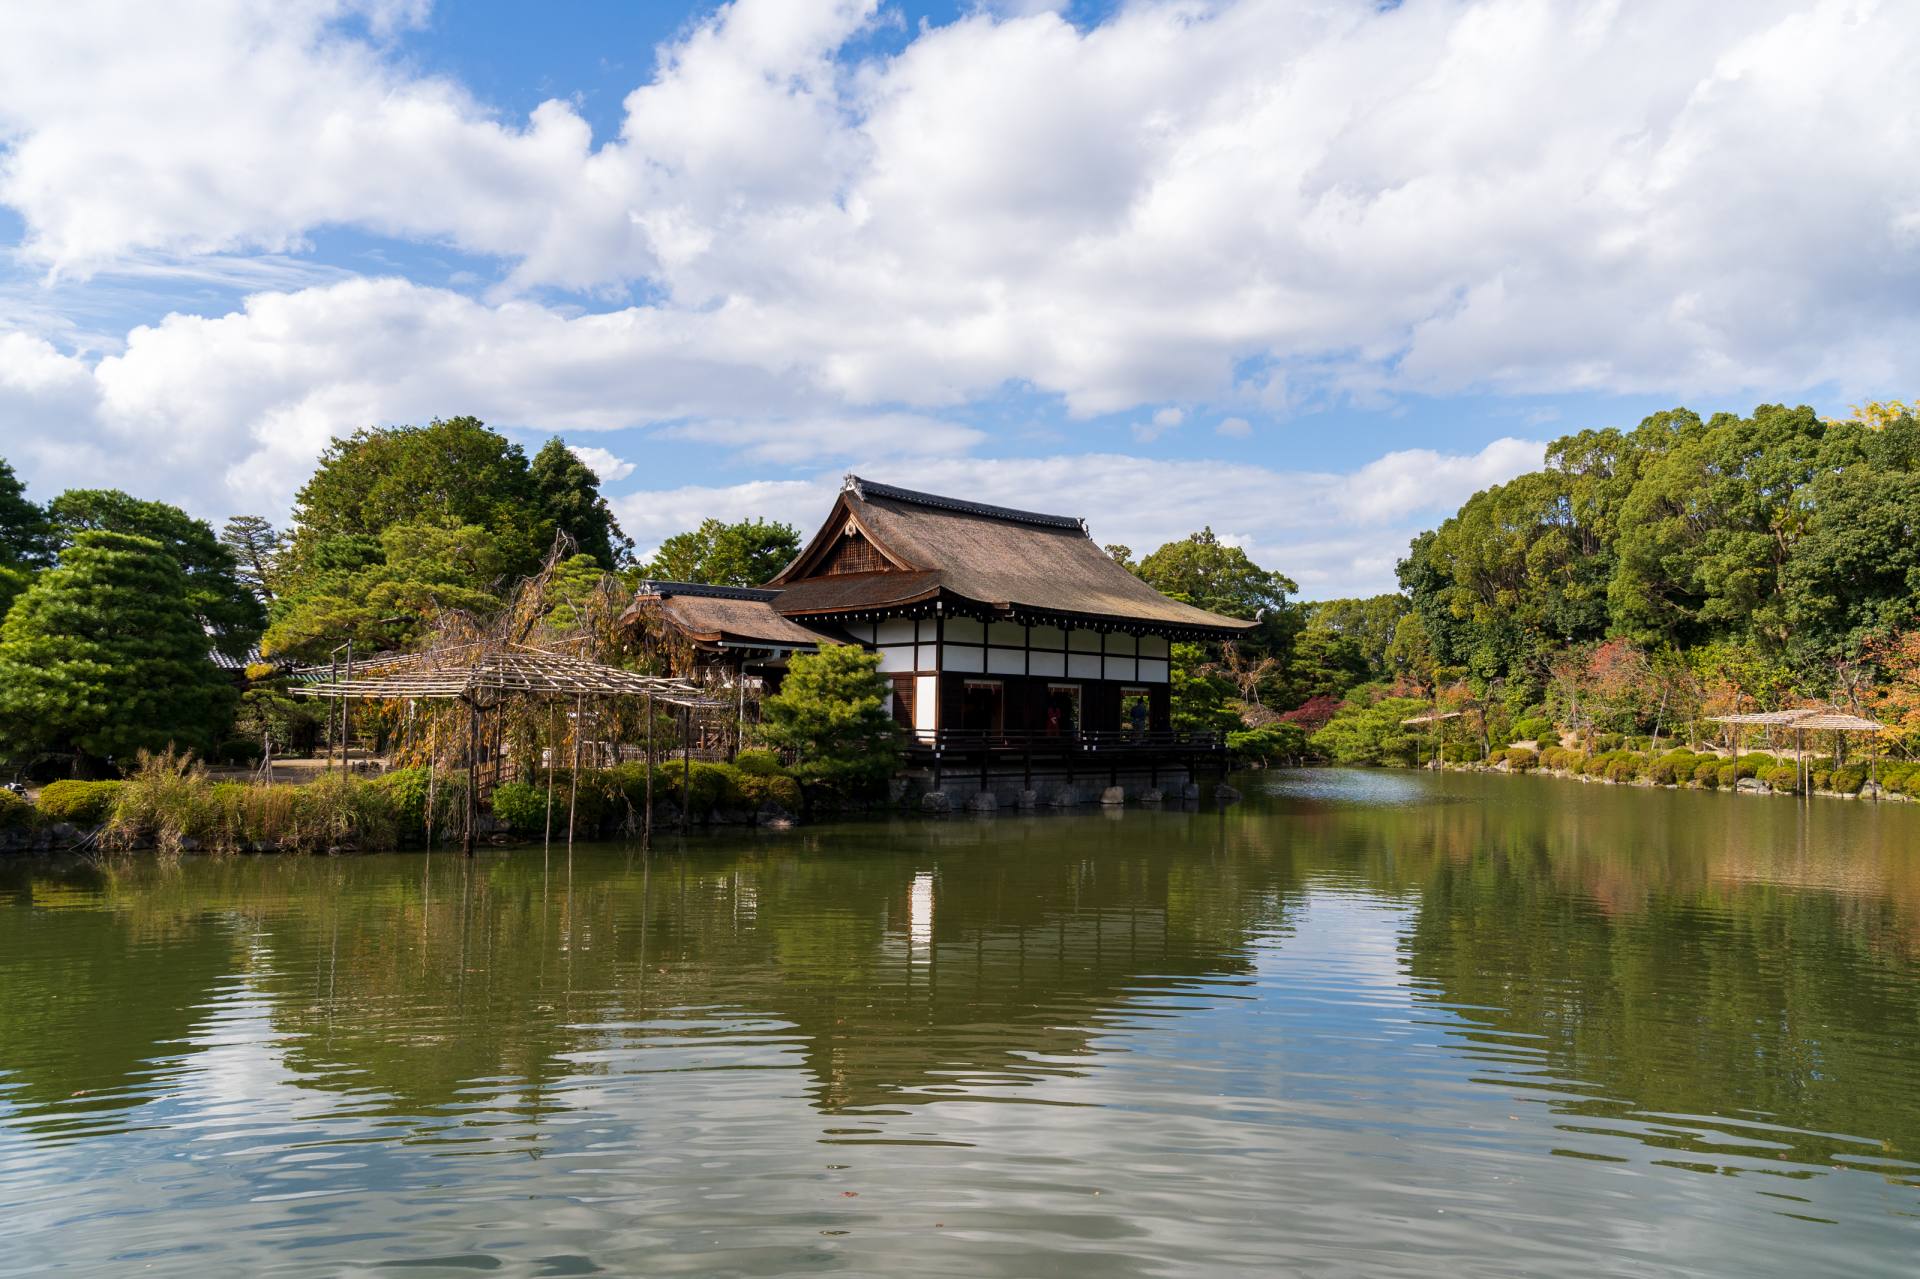 Shobikan guest house stands beside Seiho-ike Pond in the East Garden and is not usually open to the public.